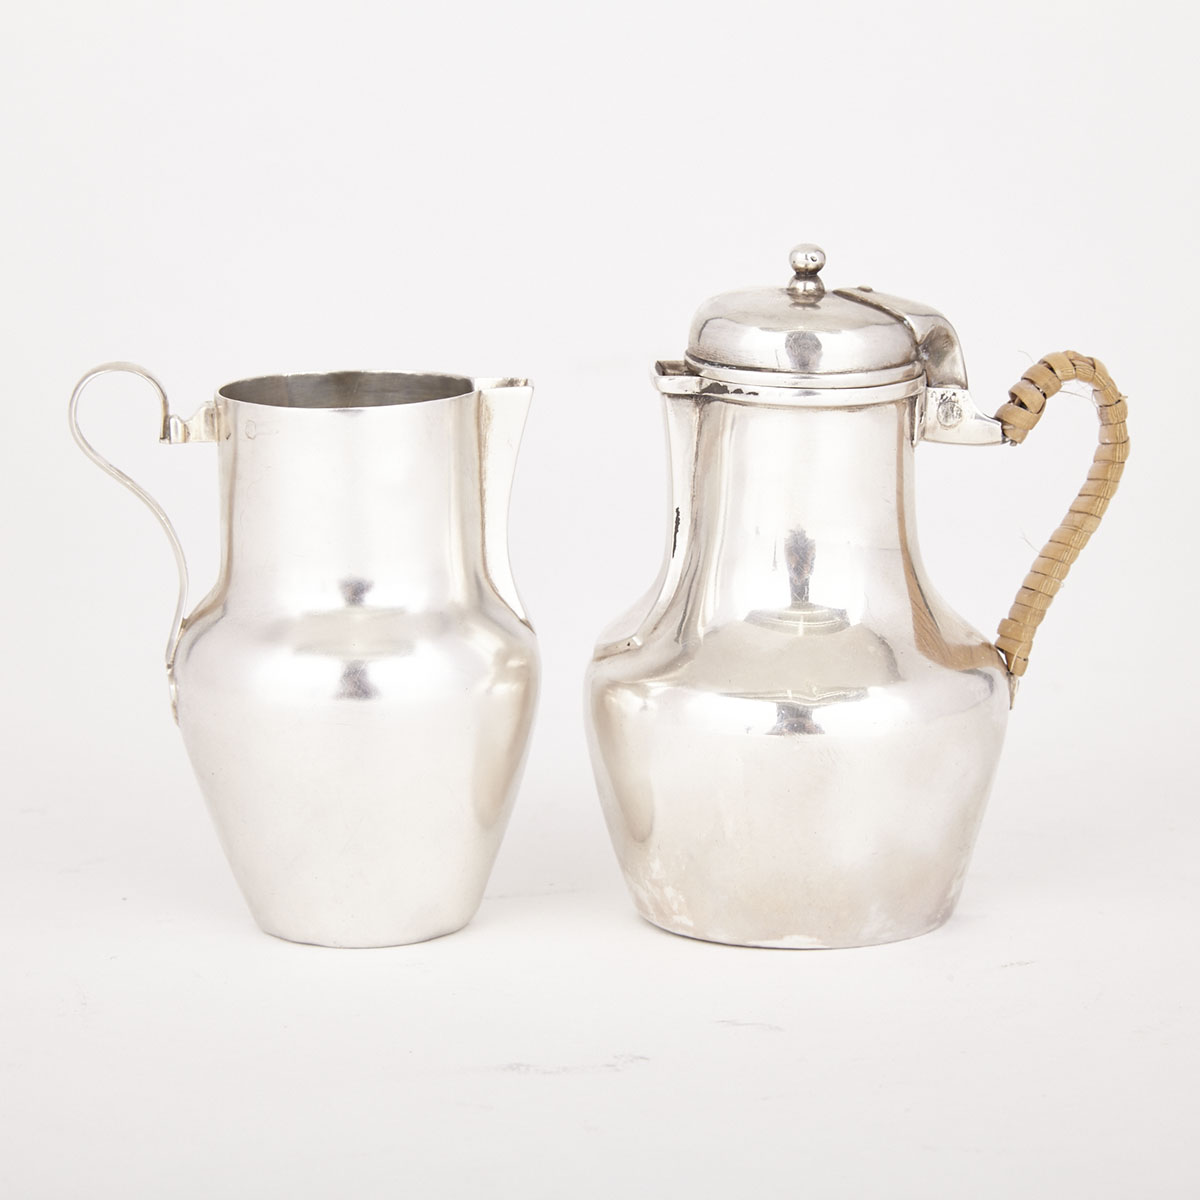 Two French Silver Cream Jugs, late 19th/early 20th century